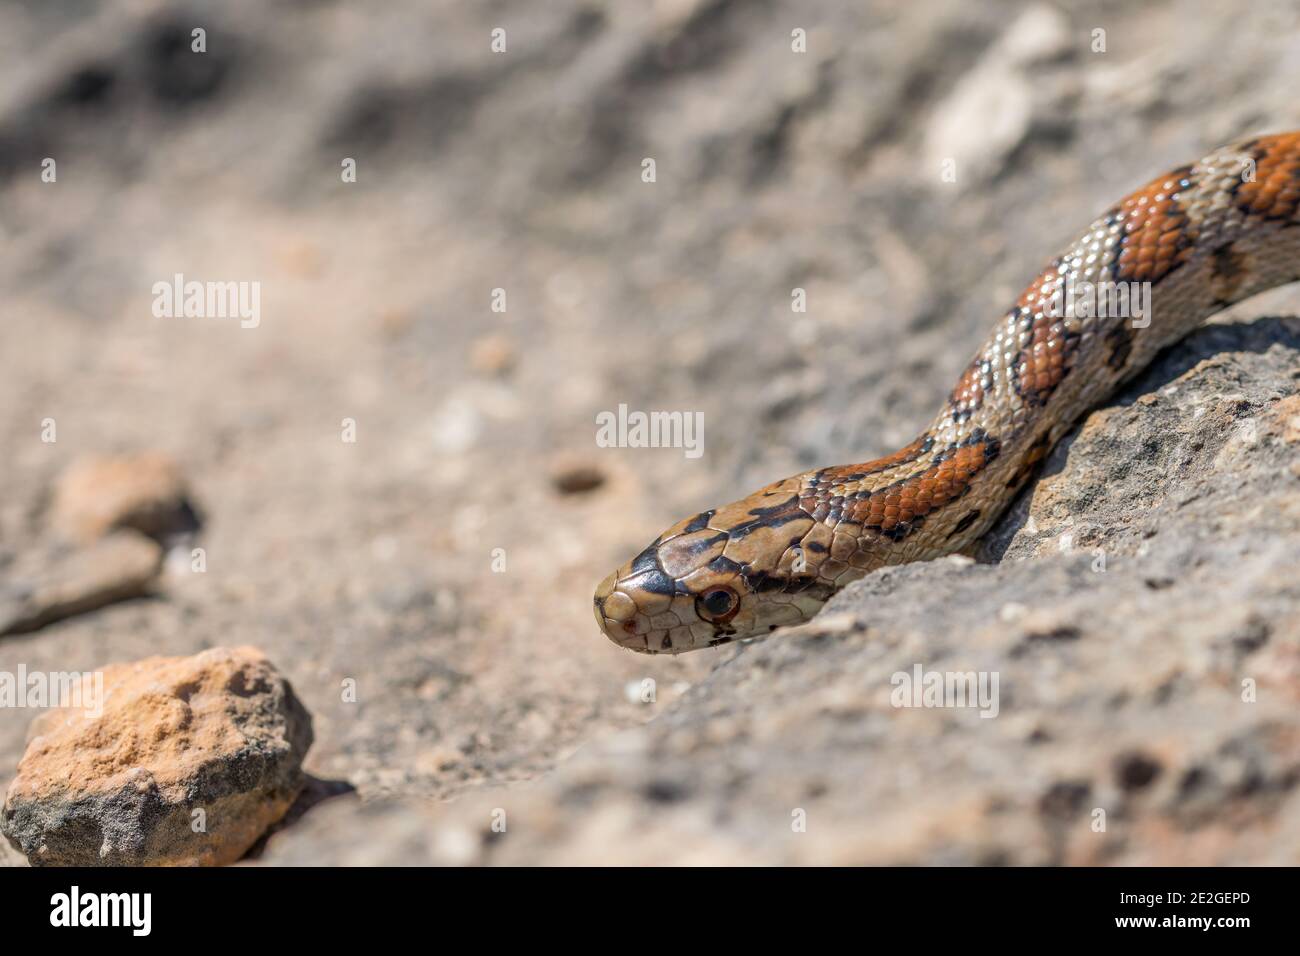 Close up of head of an adult Leopard Snake or European Ratsnake, Zamenis situla, in Malta Stock Photo